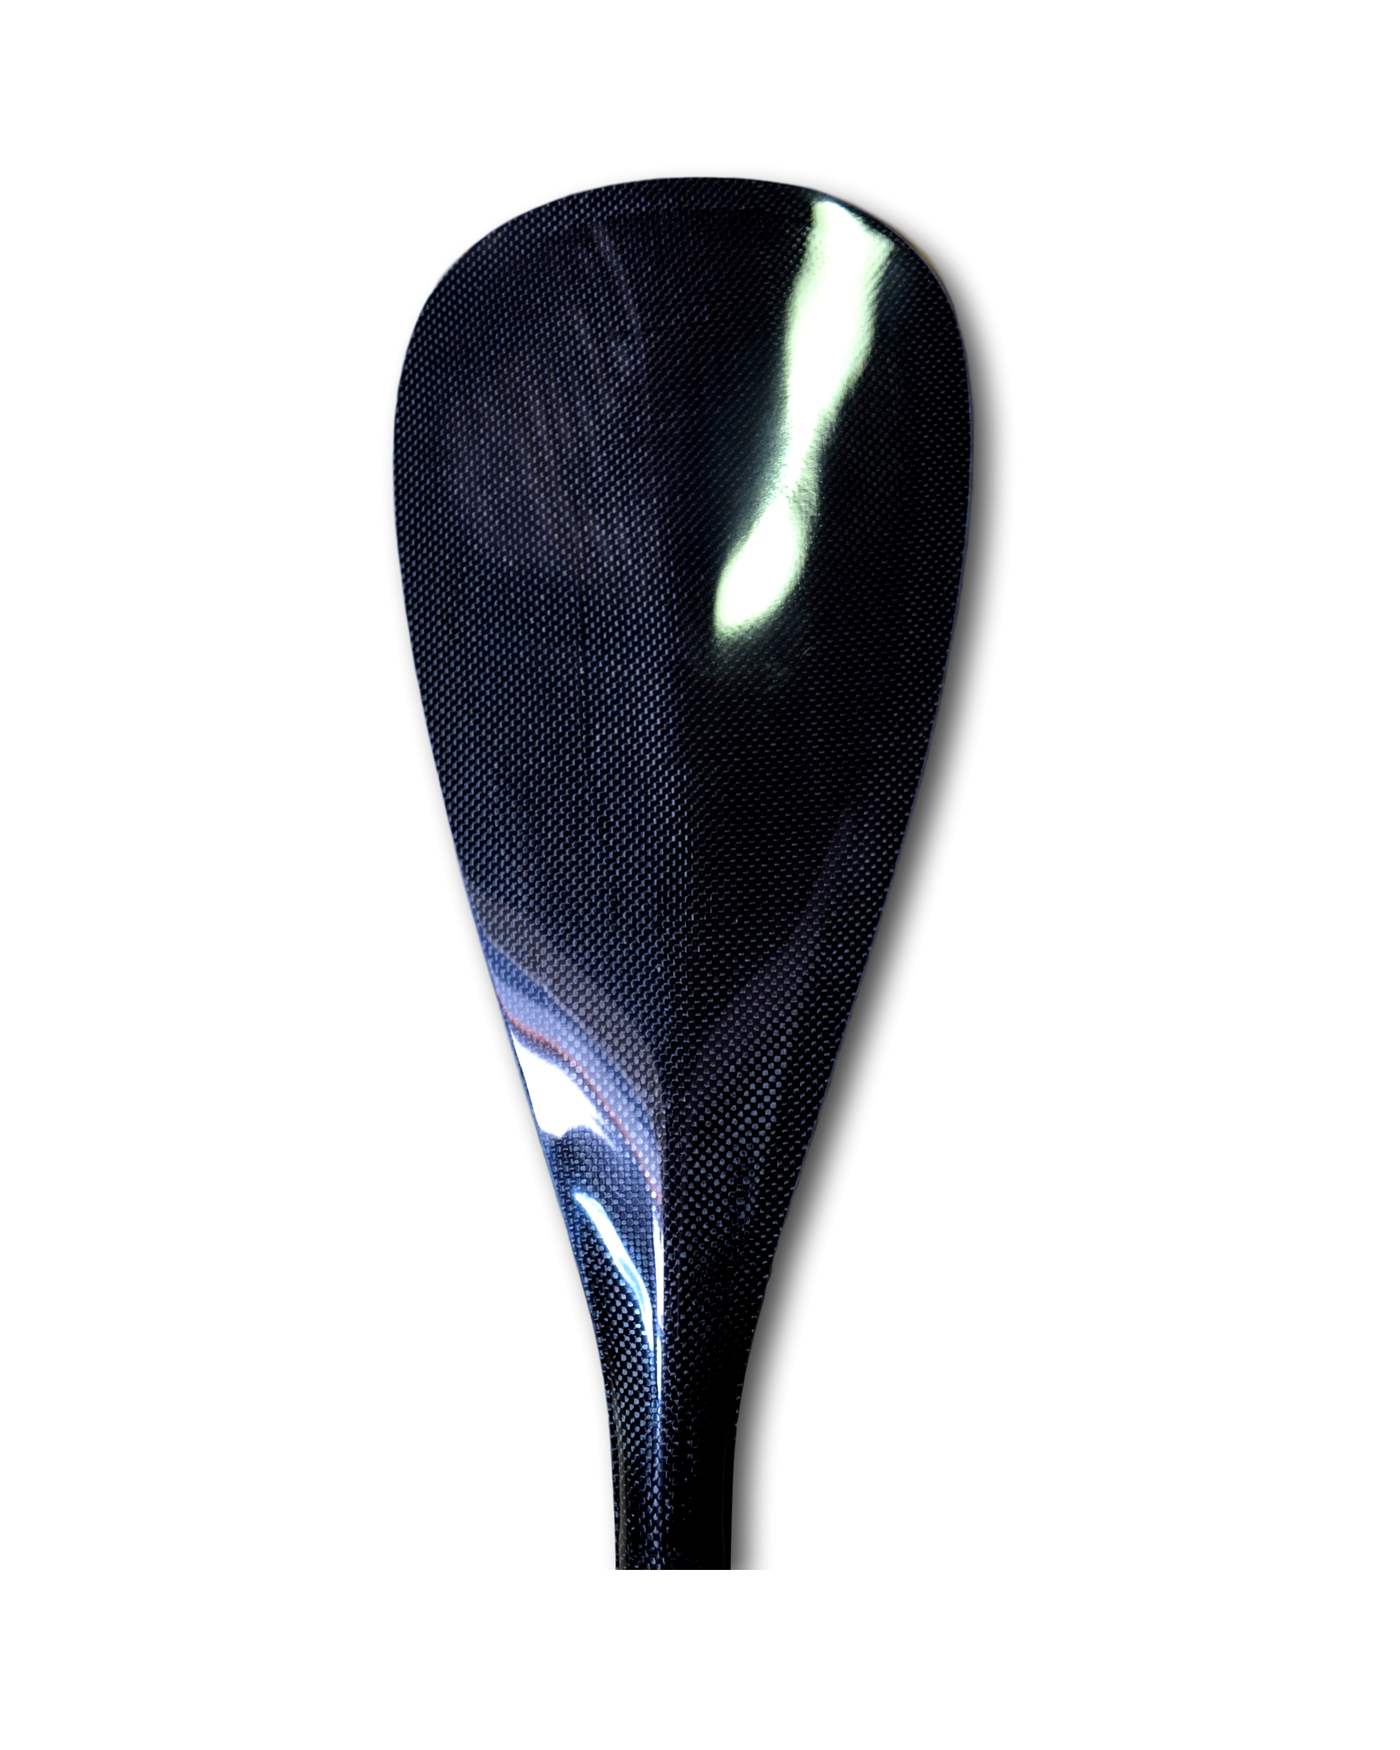 SUP Paddle Premium Carbon Small Blade Fixed Shaft Alleydesigns Paddle - Alleydesigns  Pty Ltd                                             ABN: 44165571264